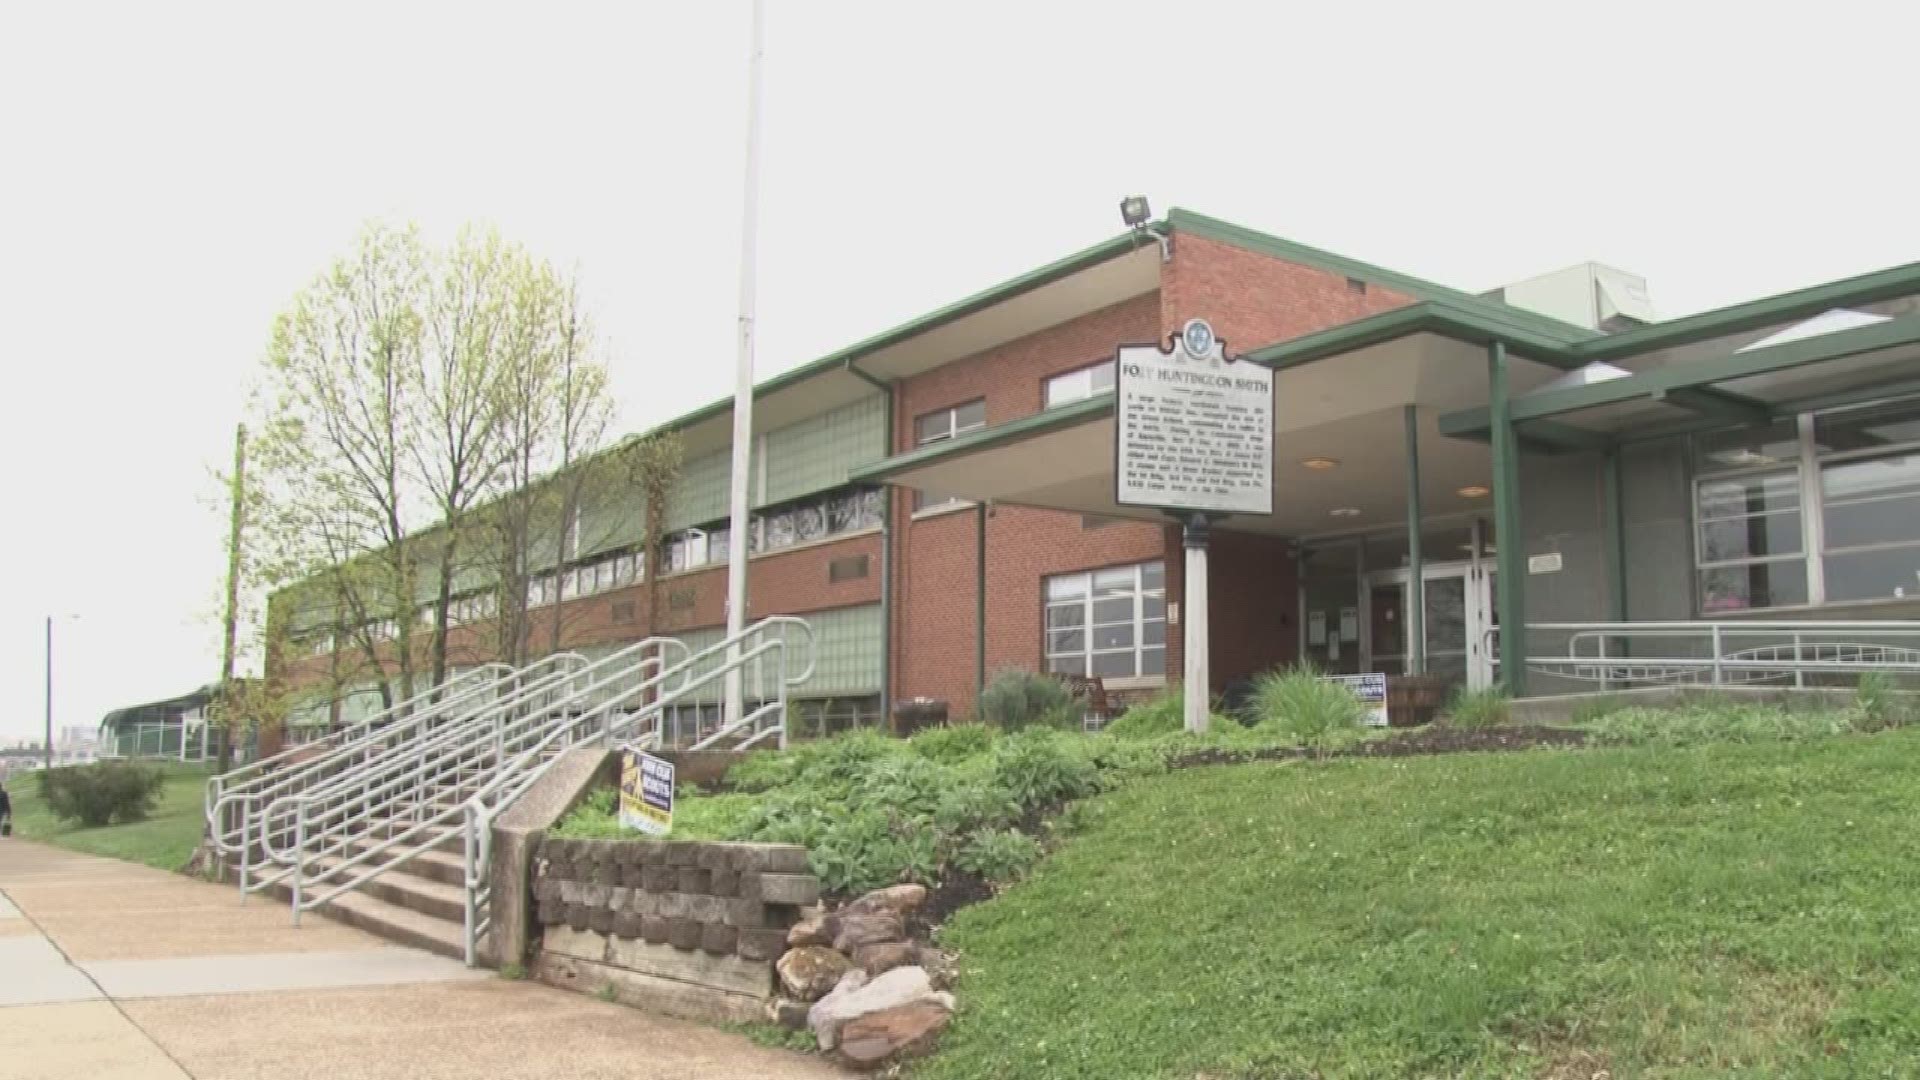 April 11, 2018: The Knox County Board of Education delayed a vote on the school district's proposed budget which would cut funding from magnet school programs and Project GRAD.